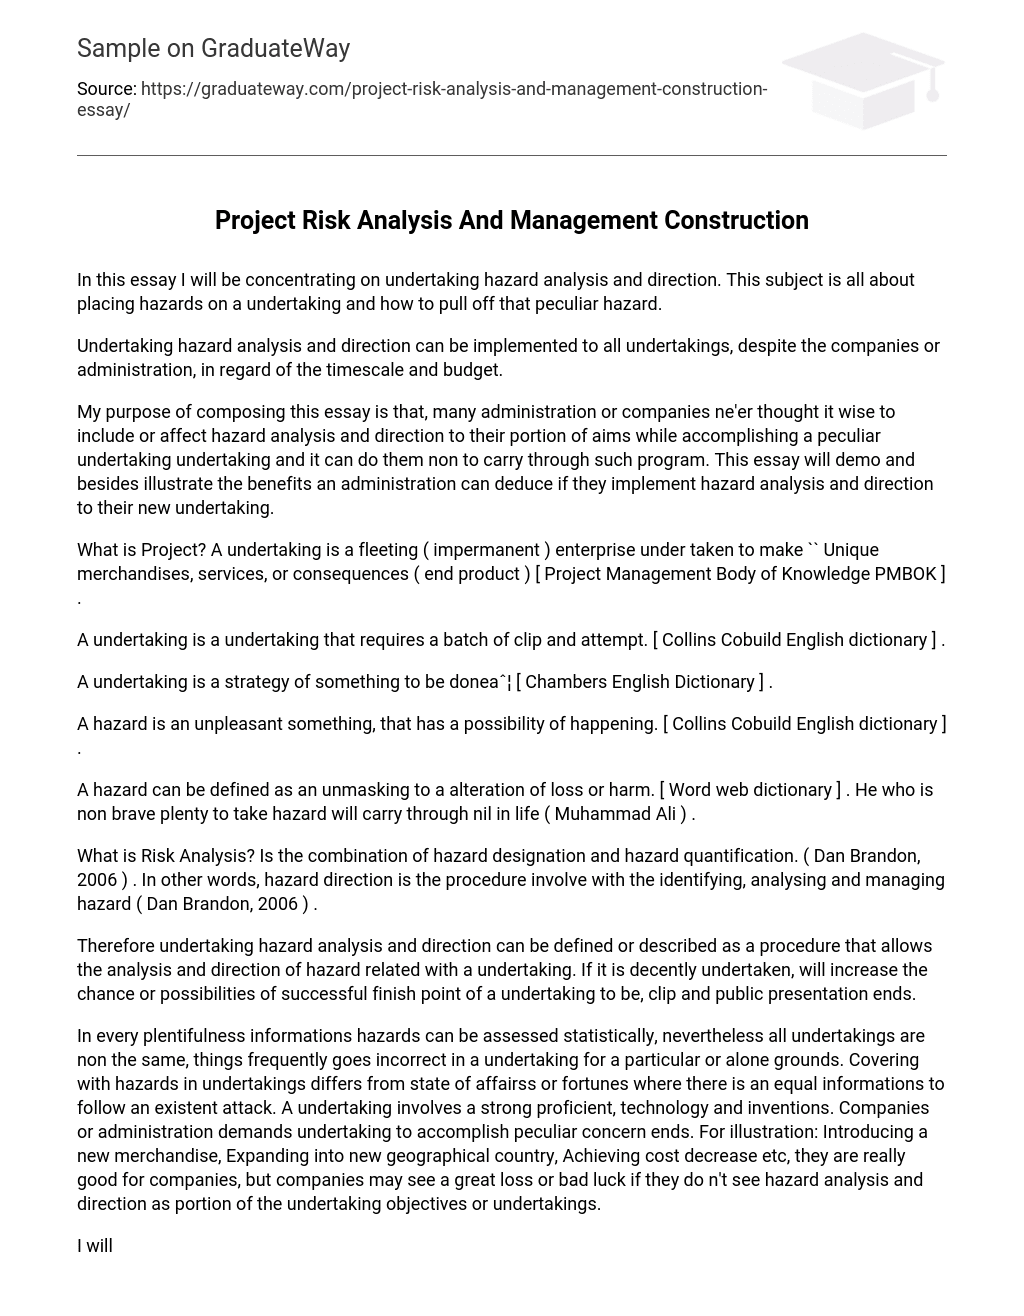 Project Risk Analysis And Management Construction